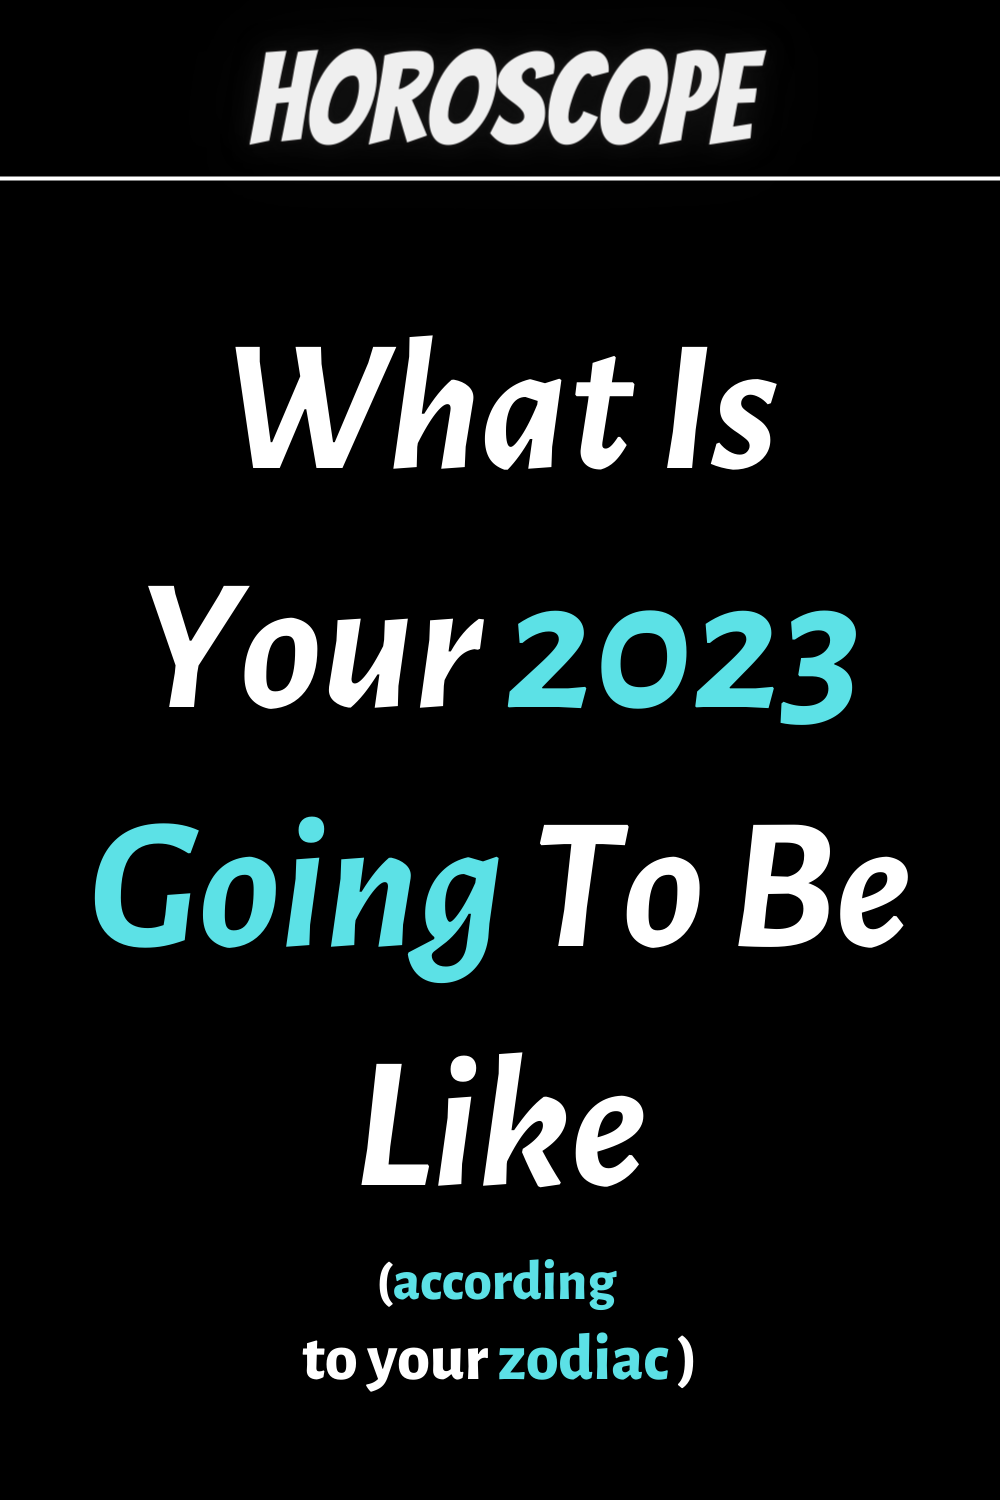 What Is Your 2023 Going To Be Like According To Your Zodiac Sign